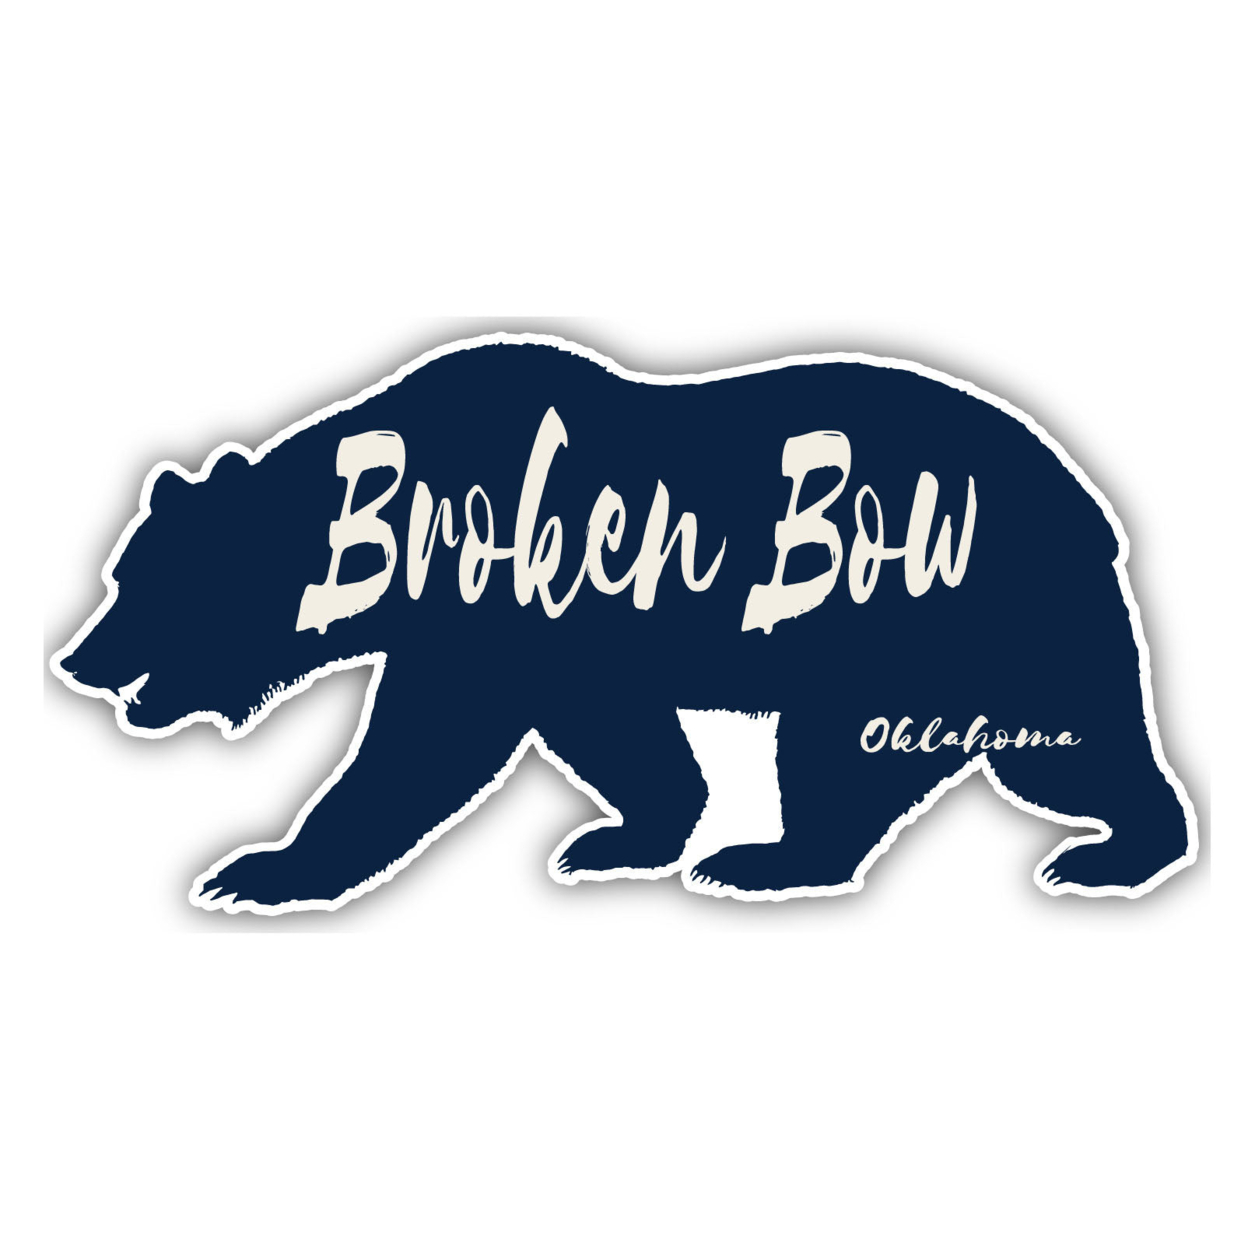 Broken Bow Oklahoma Souvenir Decorative Stickers (Choose Theme And Size) - 4-Pack, 2-Inch, Bear